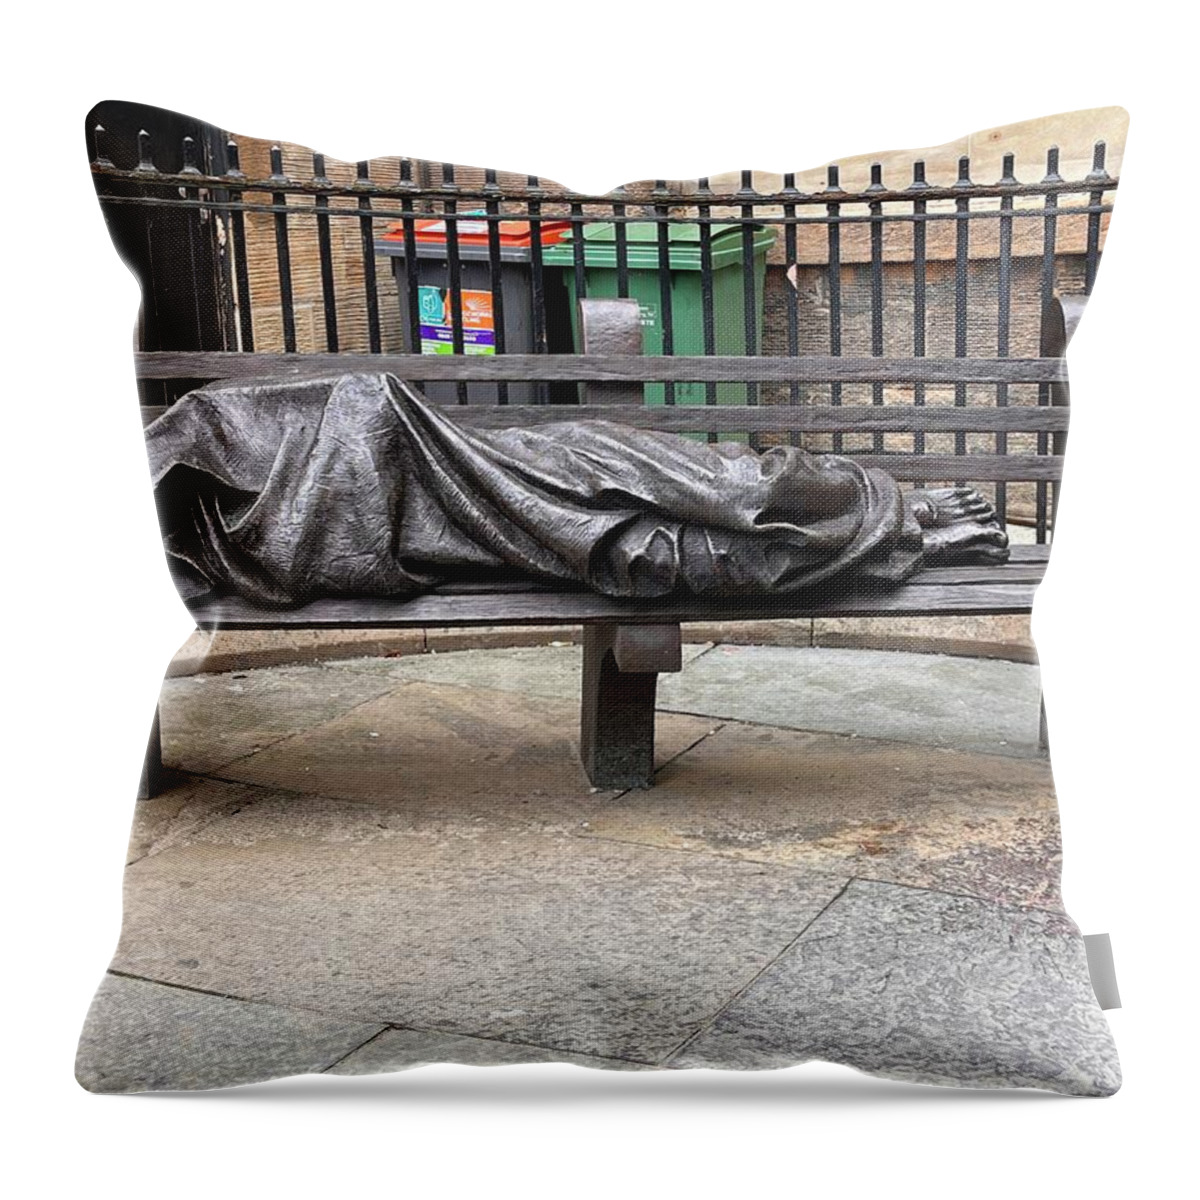 Forlorn Throw Pillow featuring the photograph The Forlorn by James Canning